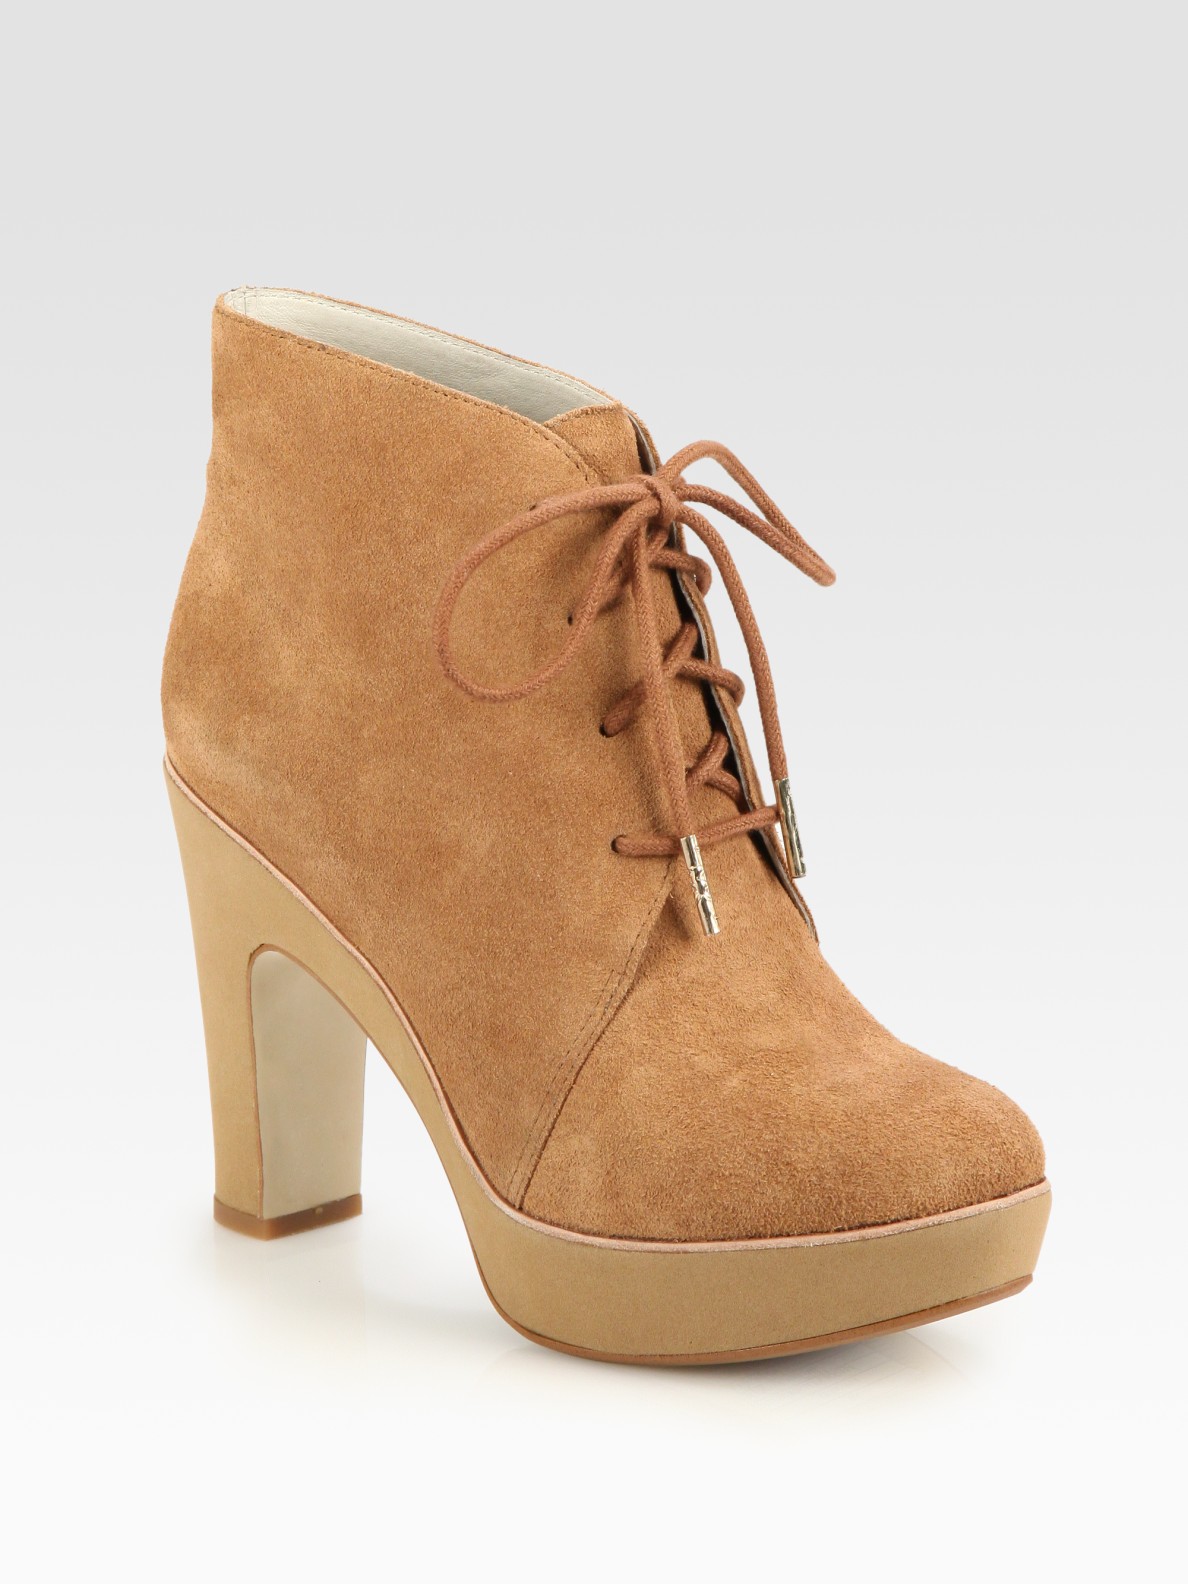 Lyst - Michael Michael Kors Rosalyn Suede Laceup Ankle Boots in Natural